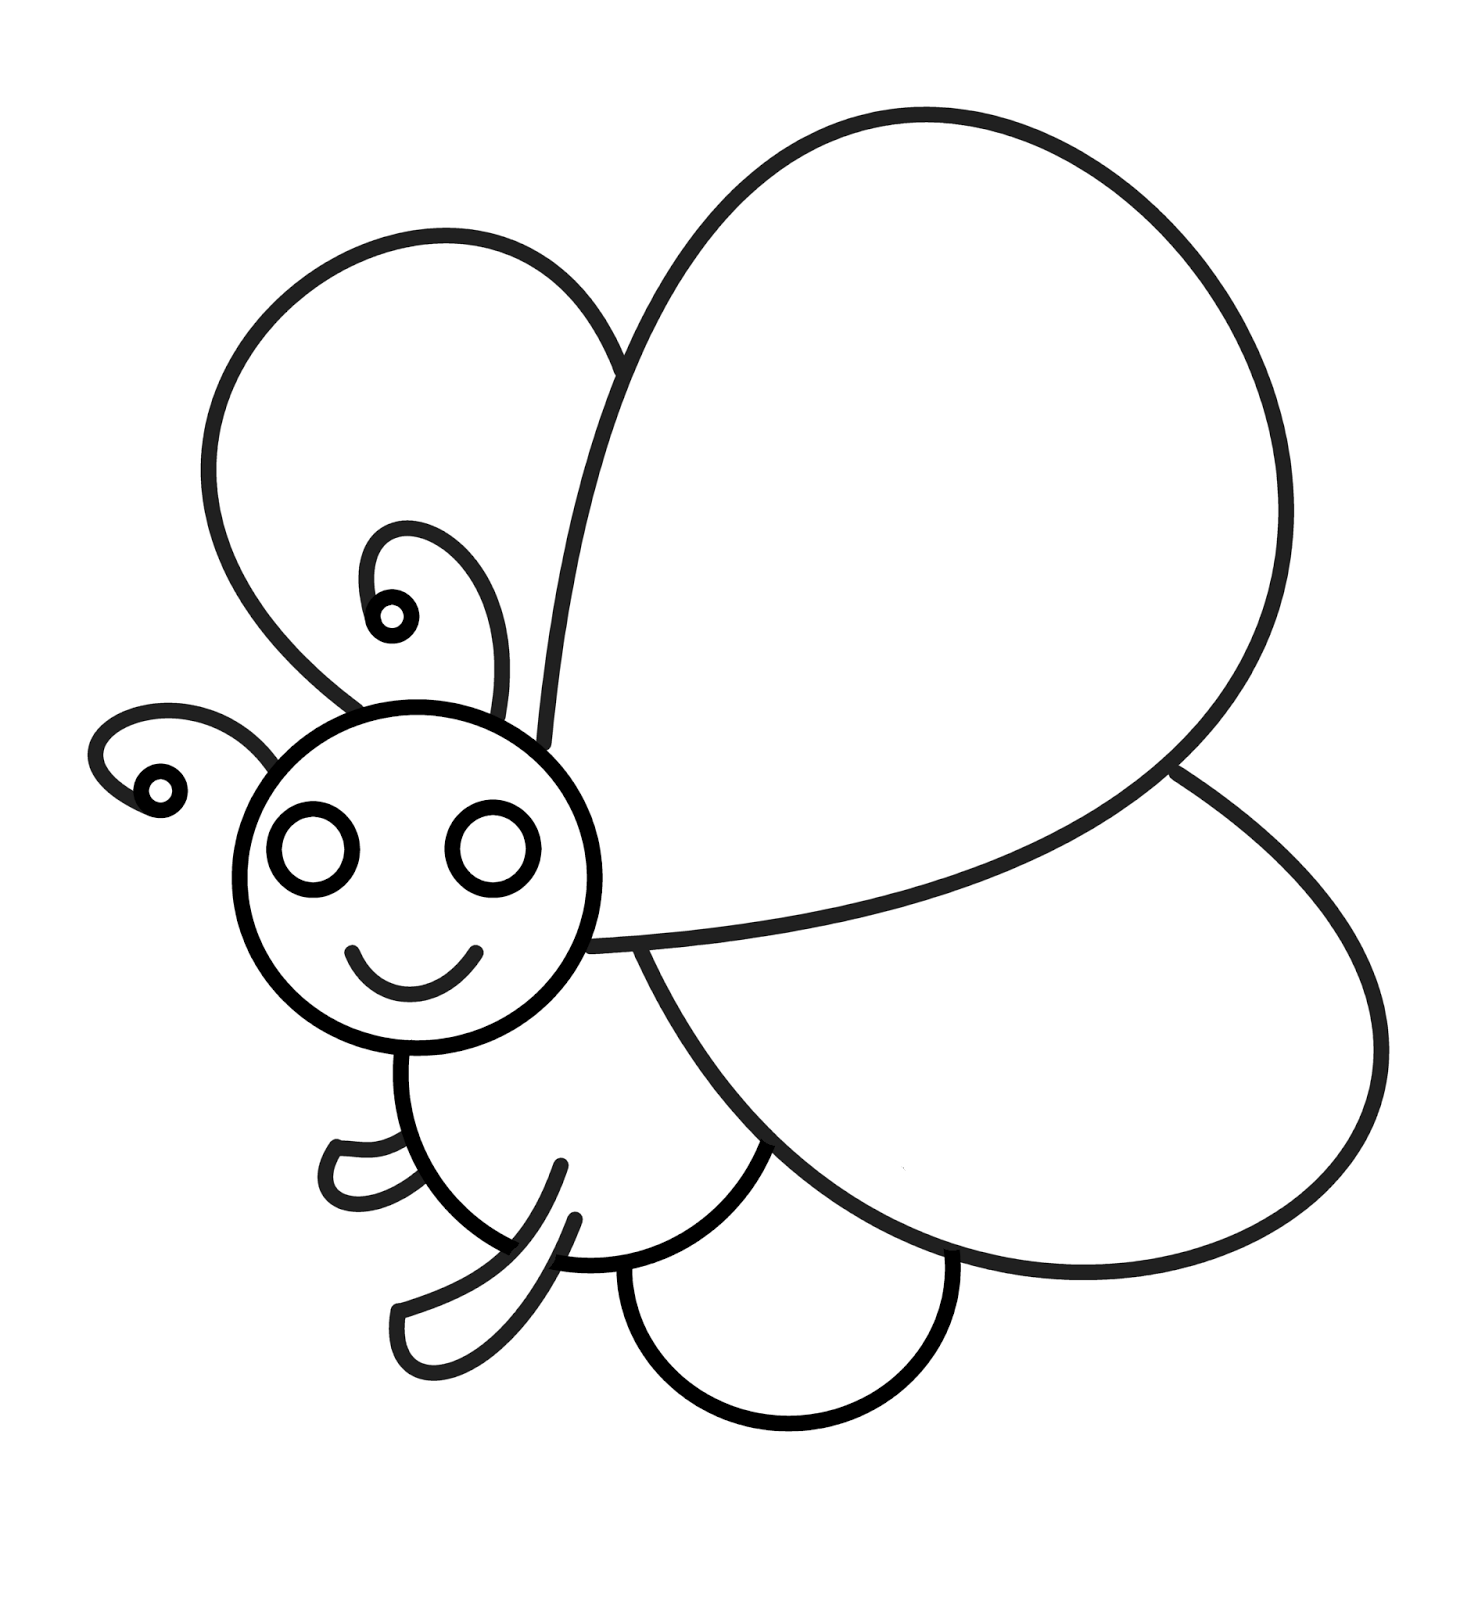 How To Draw Cartoons: Butterfly - ClipArt Best - ClipArt Best